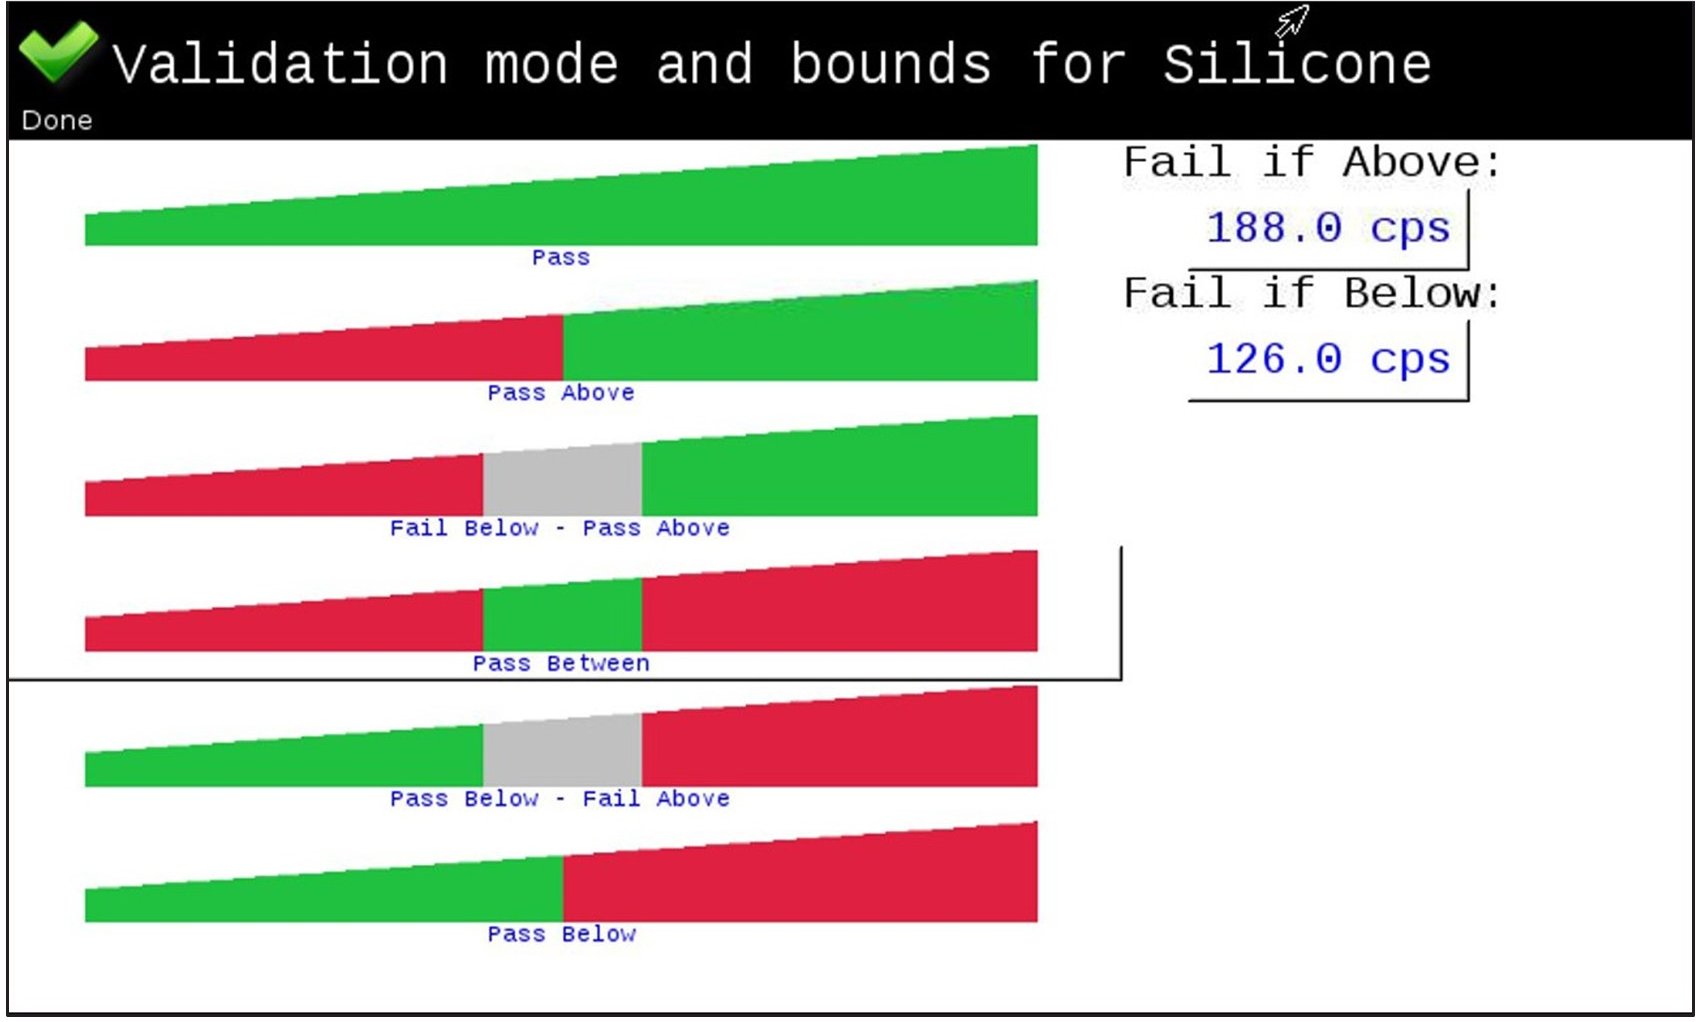 EDXRF1559 validation mode and bounds for silicone